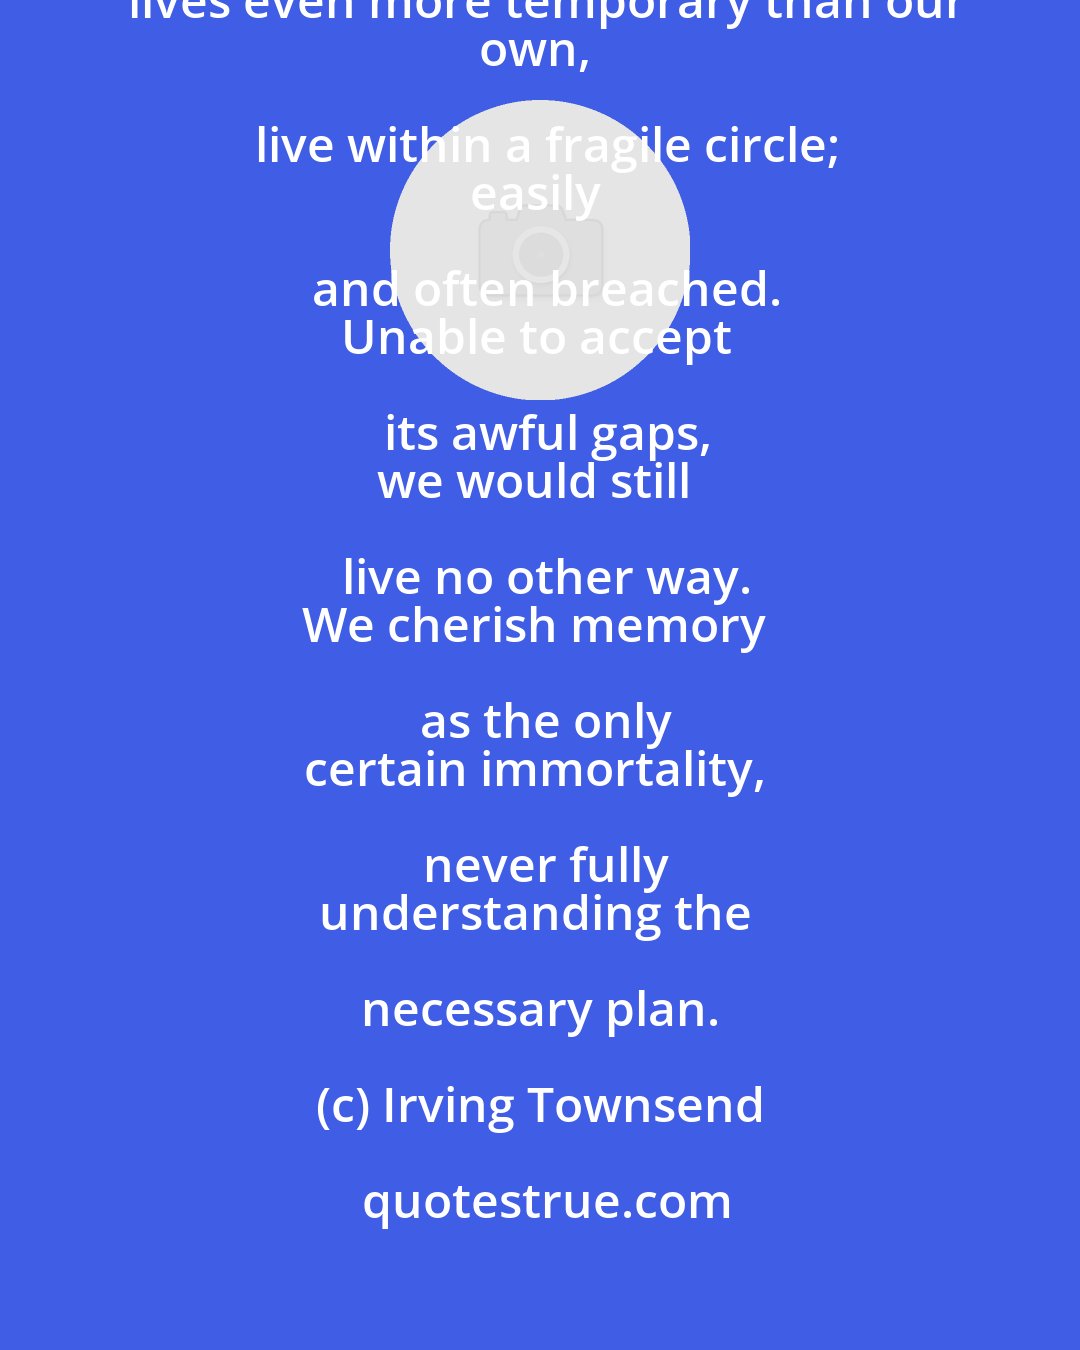 Irving Townsend: We who choose to surround ourselves
with lives even more temporary than our
own, live within a fragile circle;
easily and often breached.
Unable to accept its awful gaps,
we would still live no other way.
We cherish memory as the only
certain immortality, never fully
understanding the necessary plan.